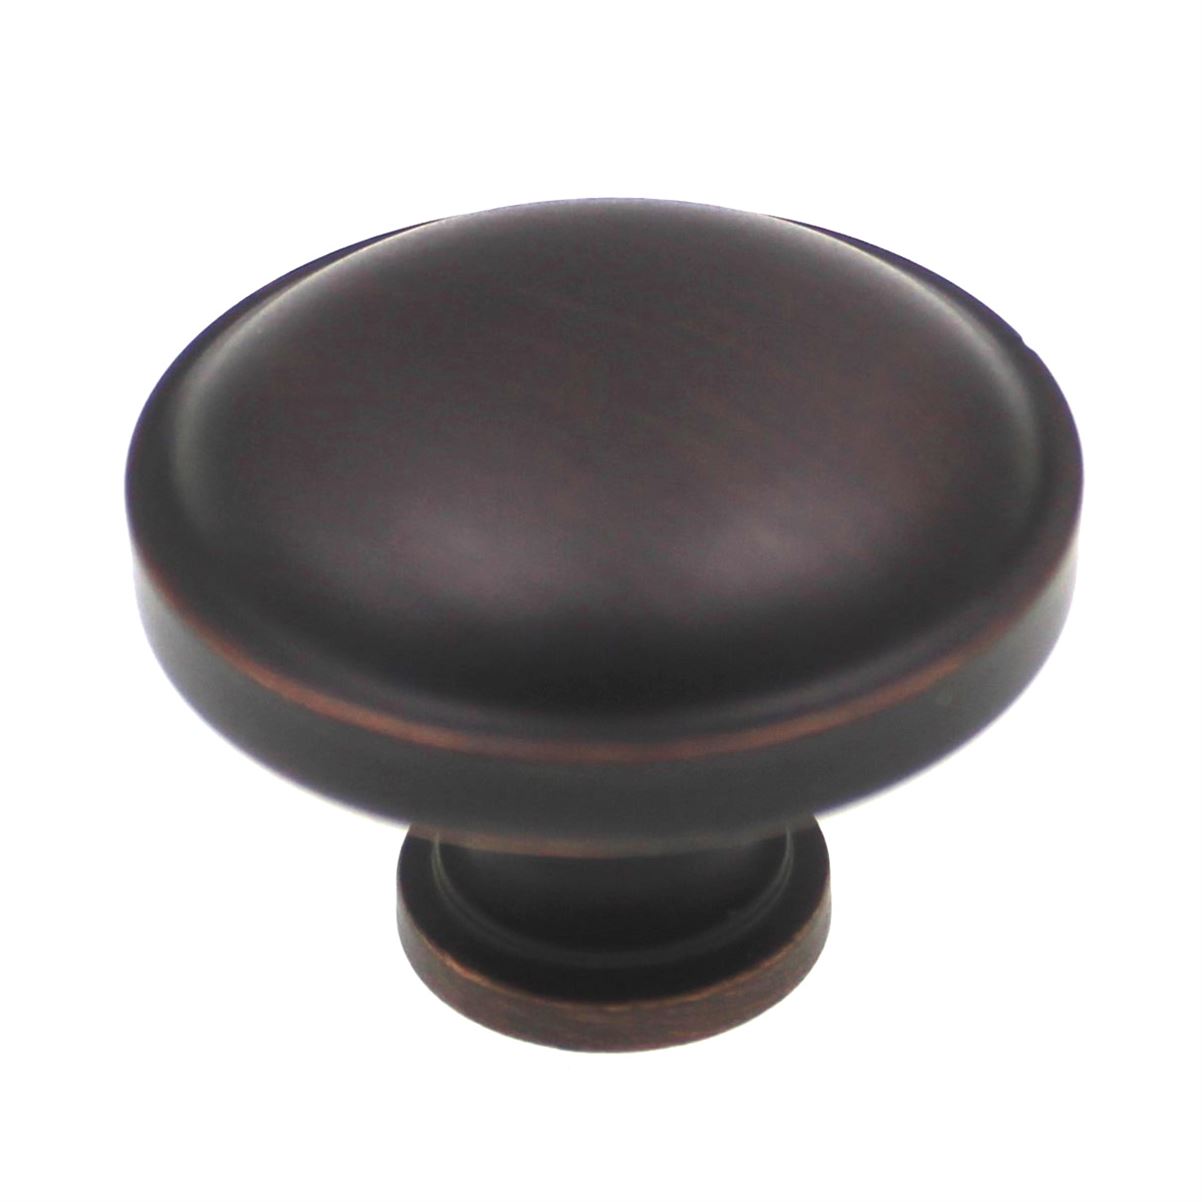 Amerock Everyday Heritage Oil-Rubbed Bronze 1 1/4" Round Cabinet Knob BP53015ORB